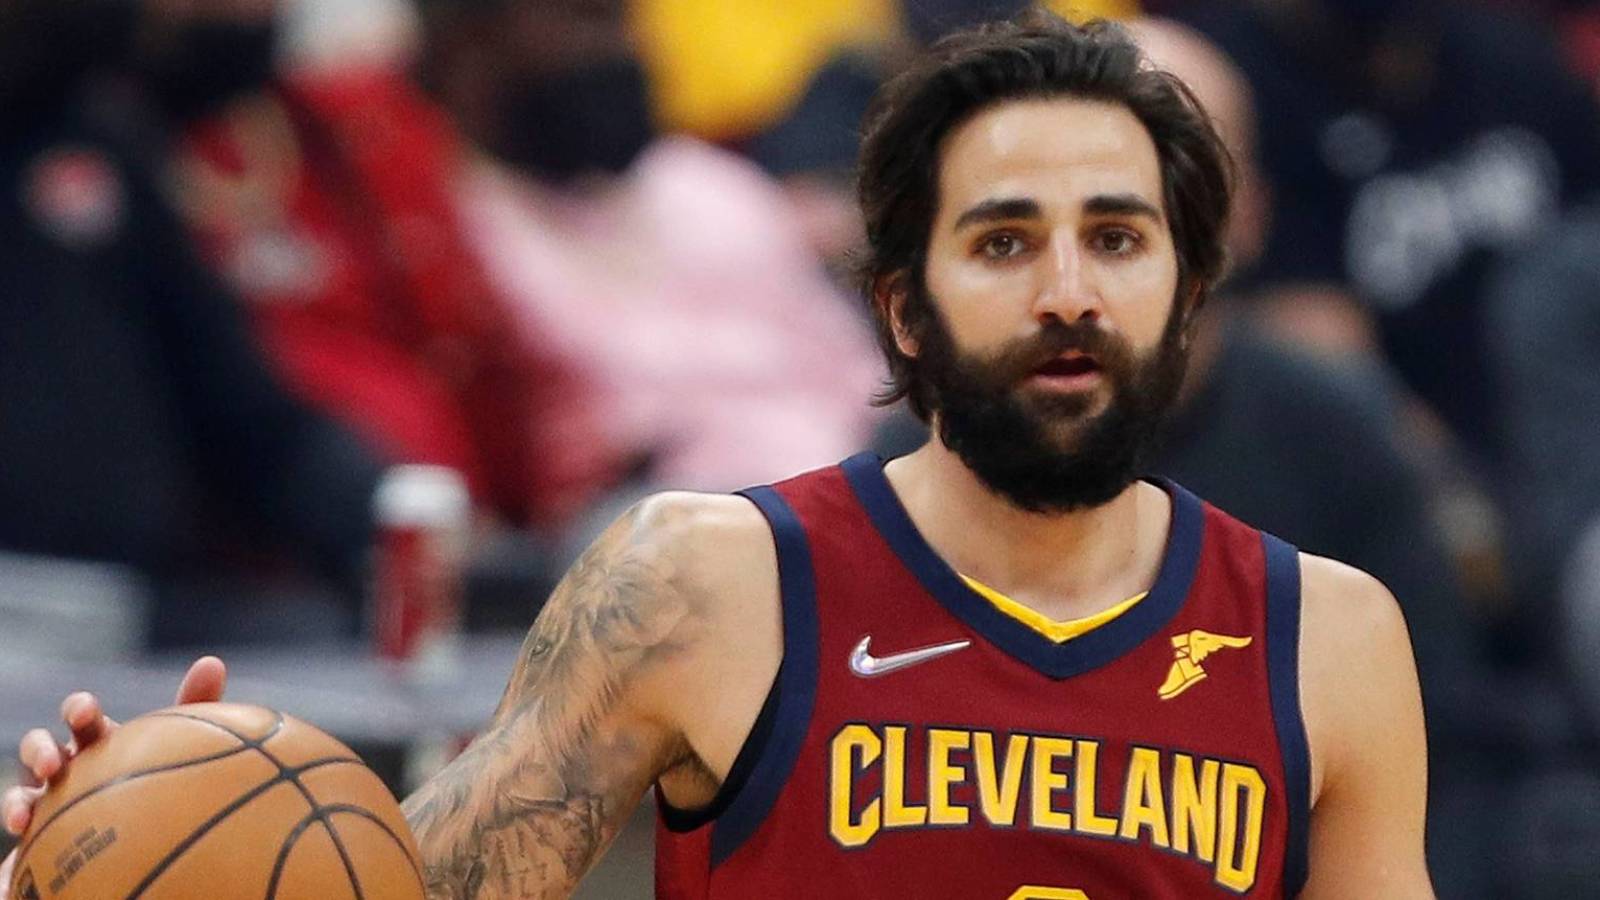 Cavaliers' Ricky Rubio helped off court after suffering non-contact injury